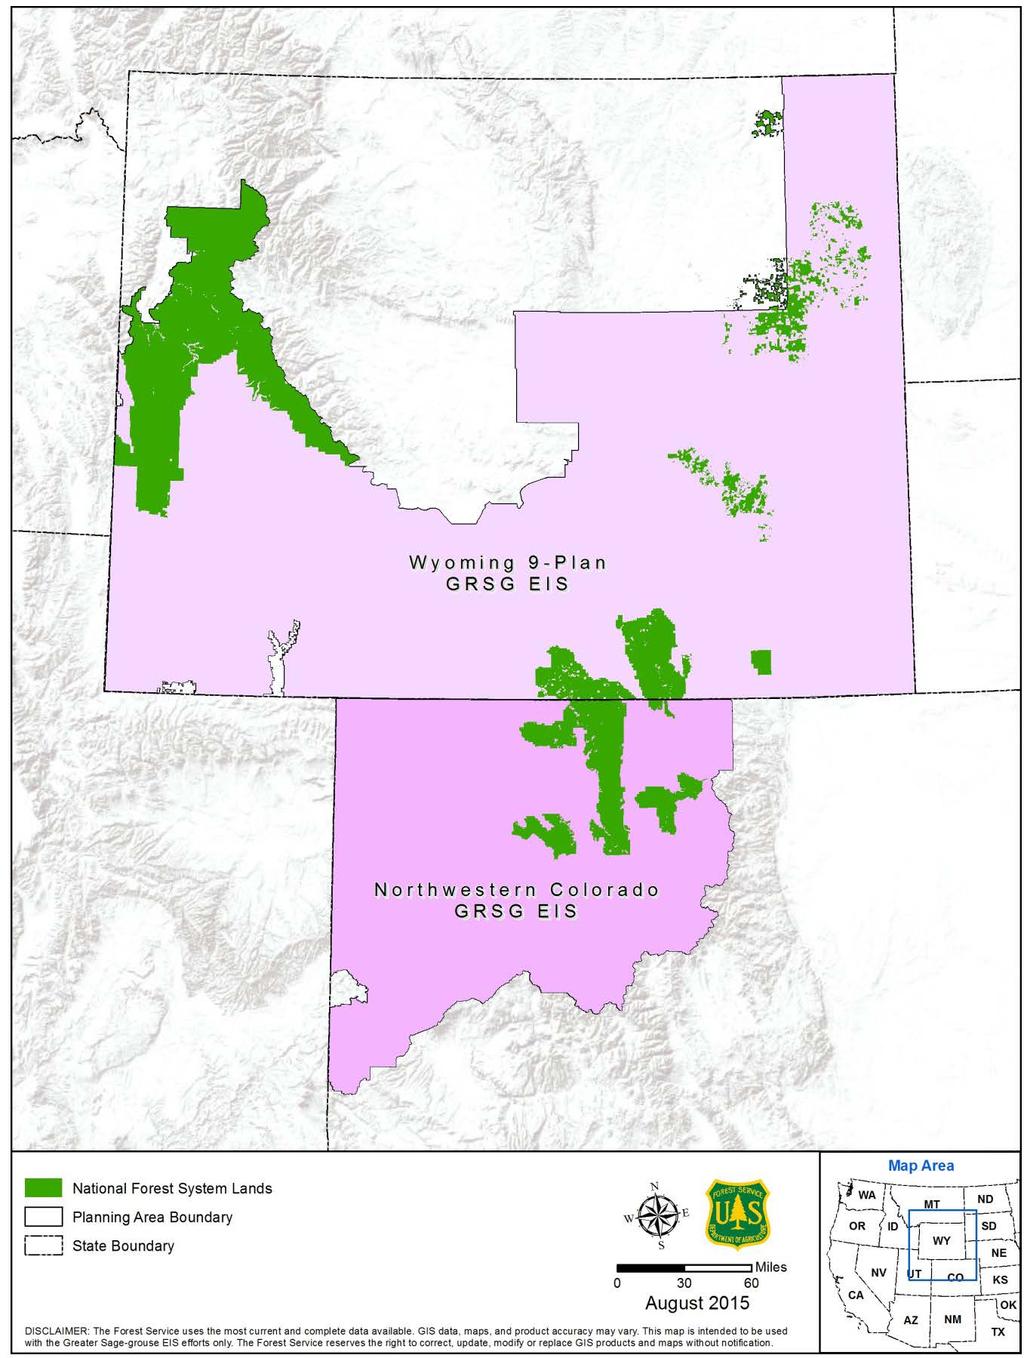 Figure 3. National Forest System Lands within the Rocky Mountain Region Planning Area.